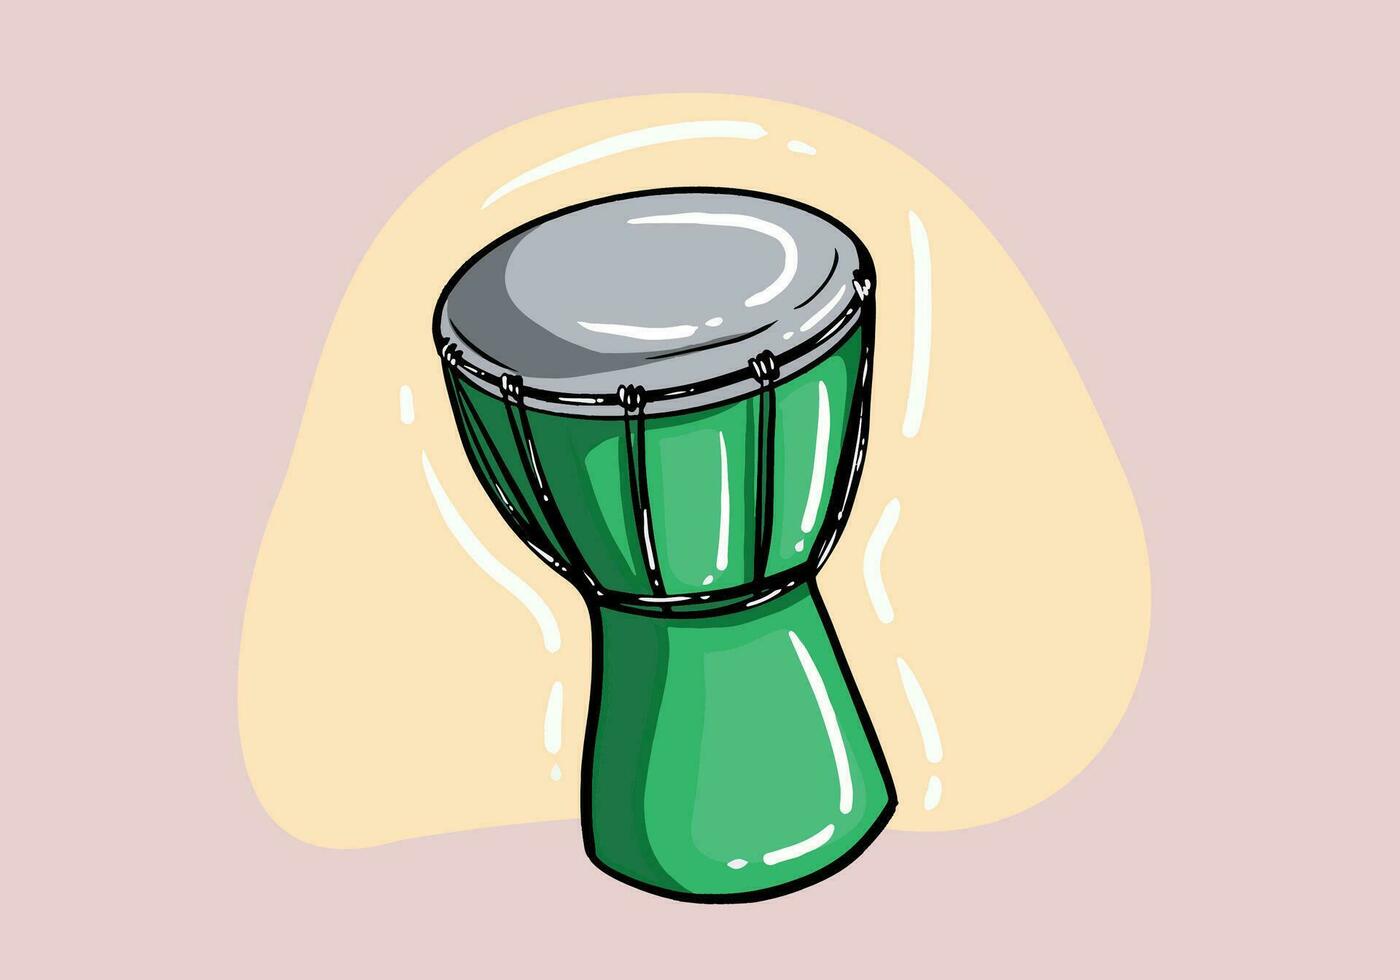 African djembe drum in cartoon style isolated on background. Ethnic, traditional musical instrument. vector